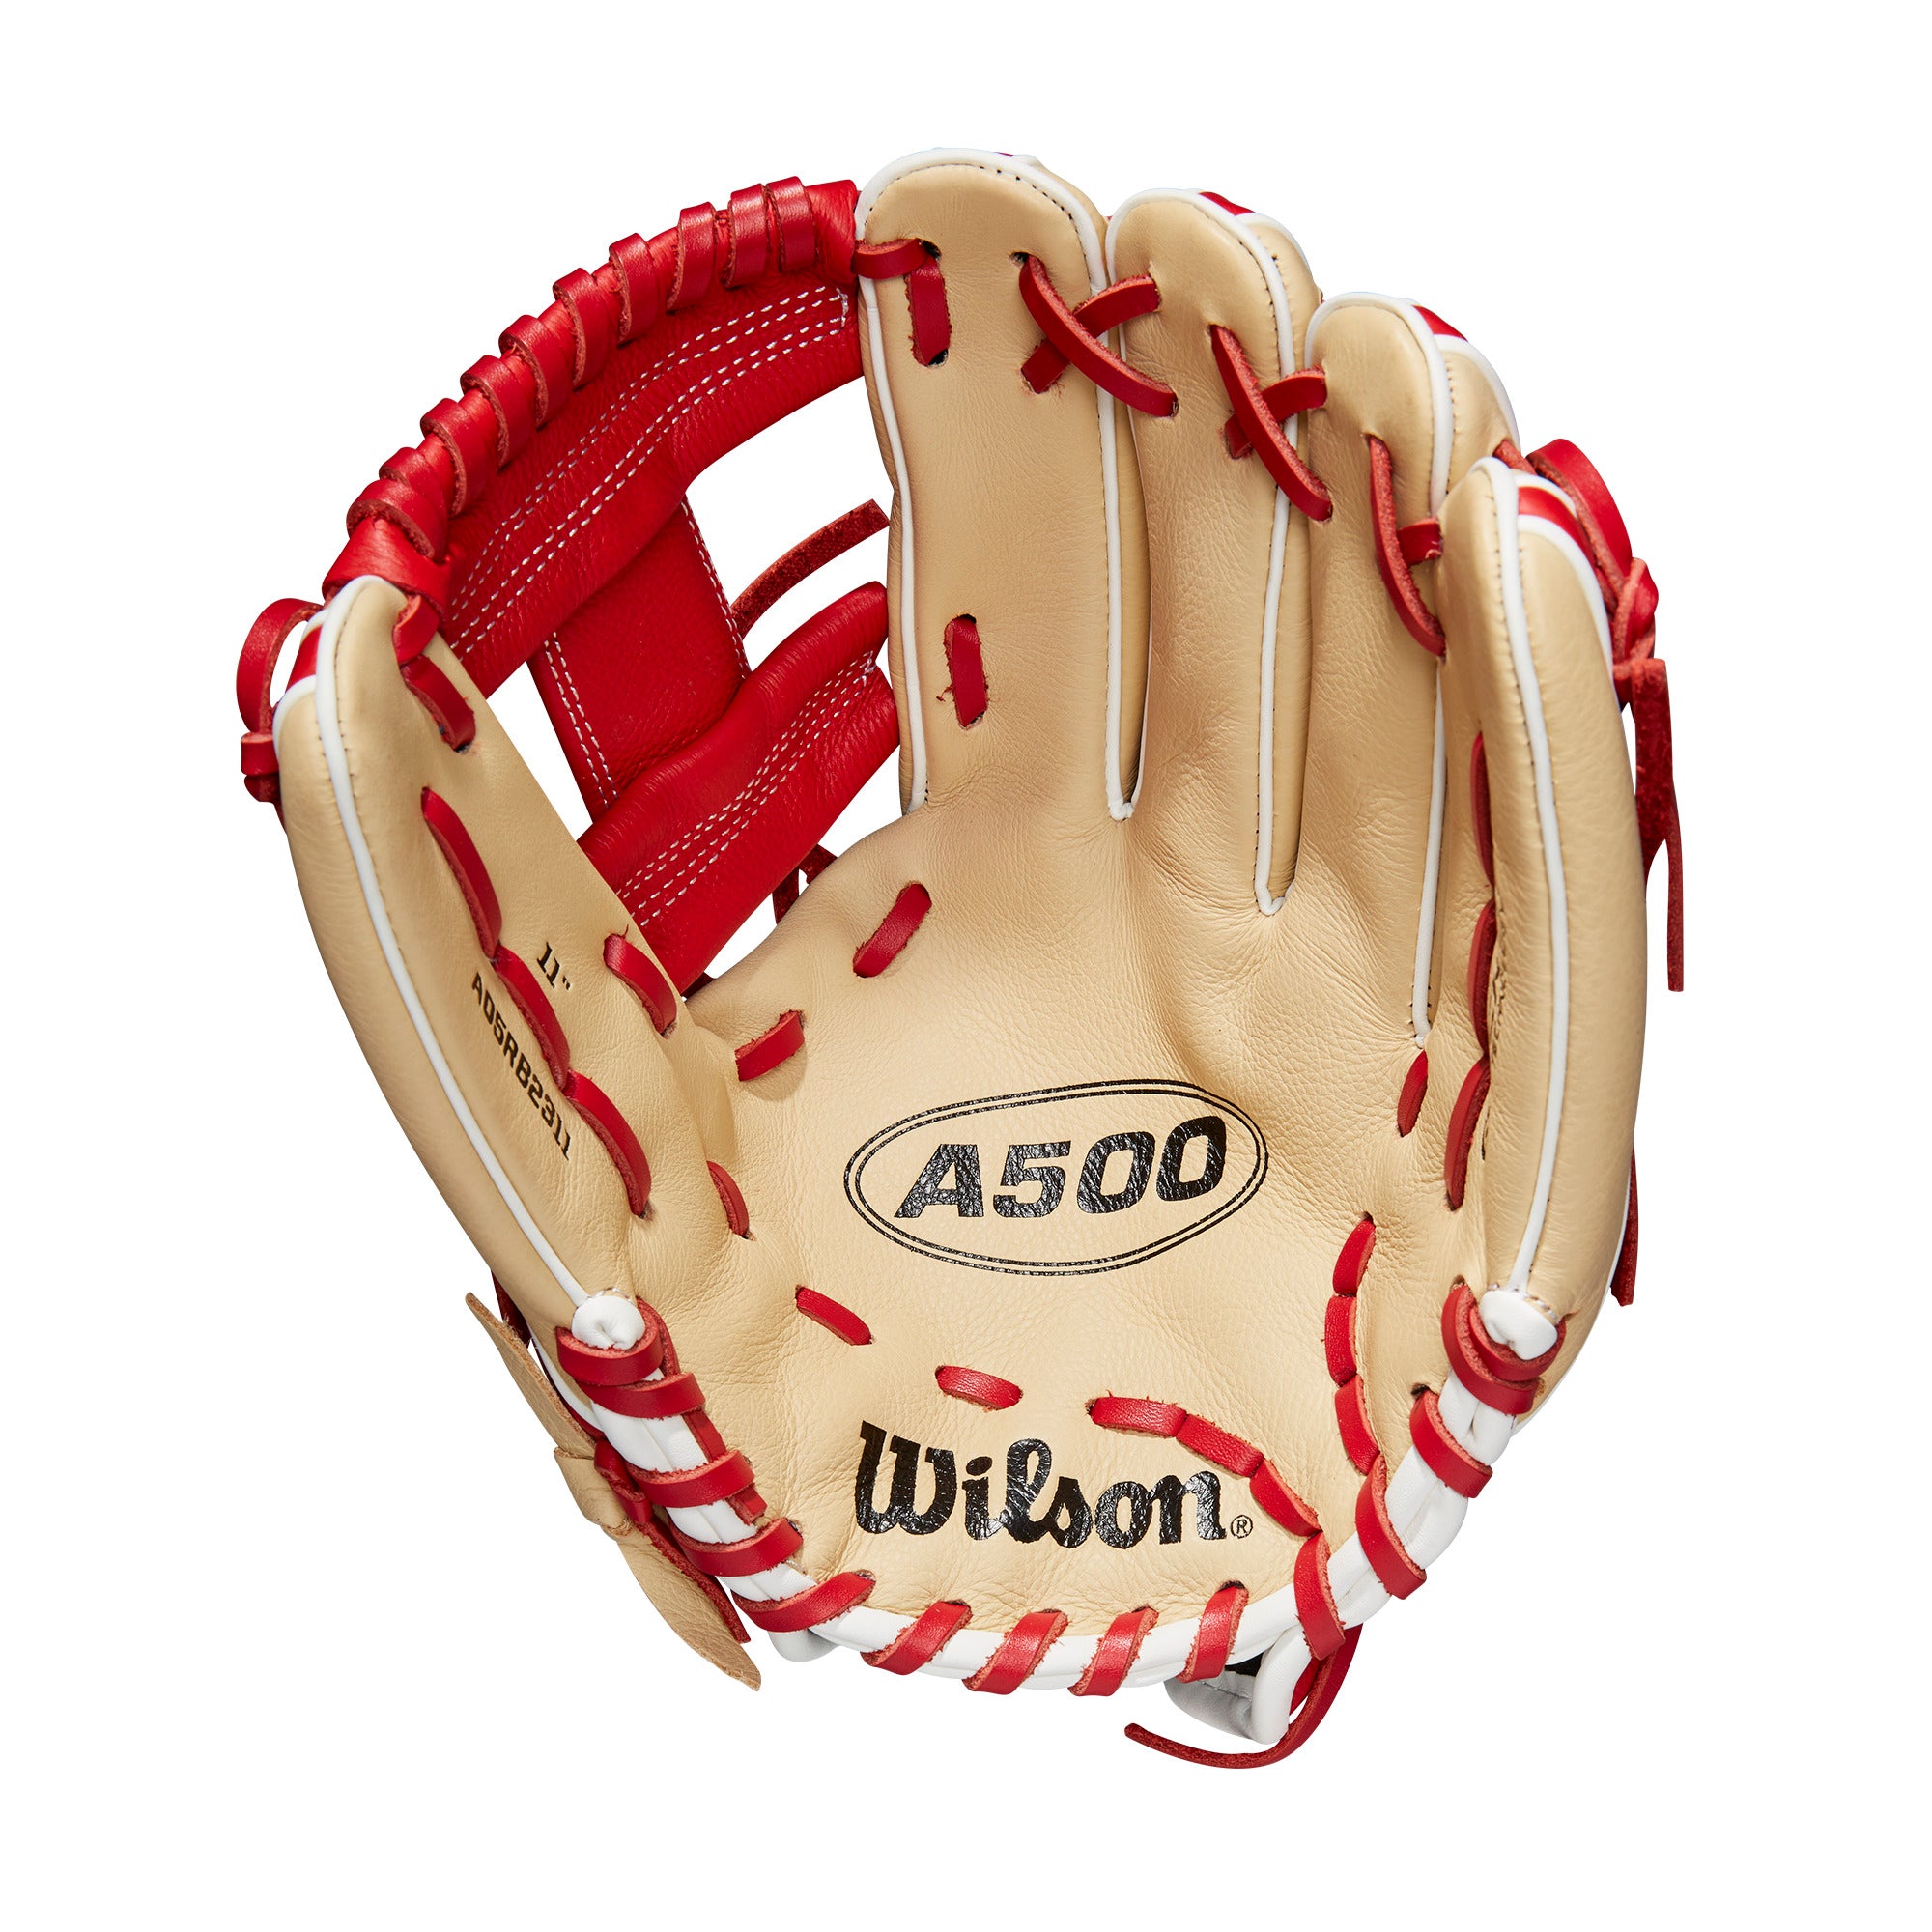 Wilson A500 11-inch Utility Youth Baseball Glove Blonde/Red/White